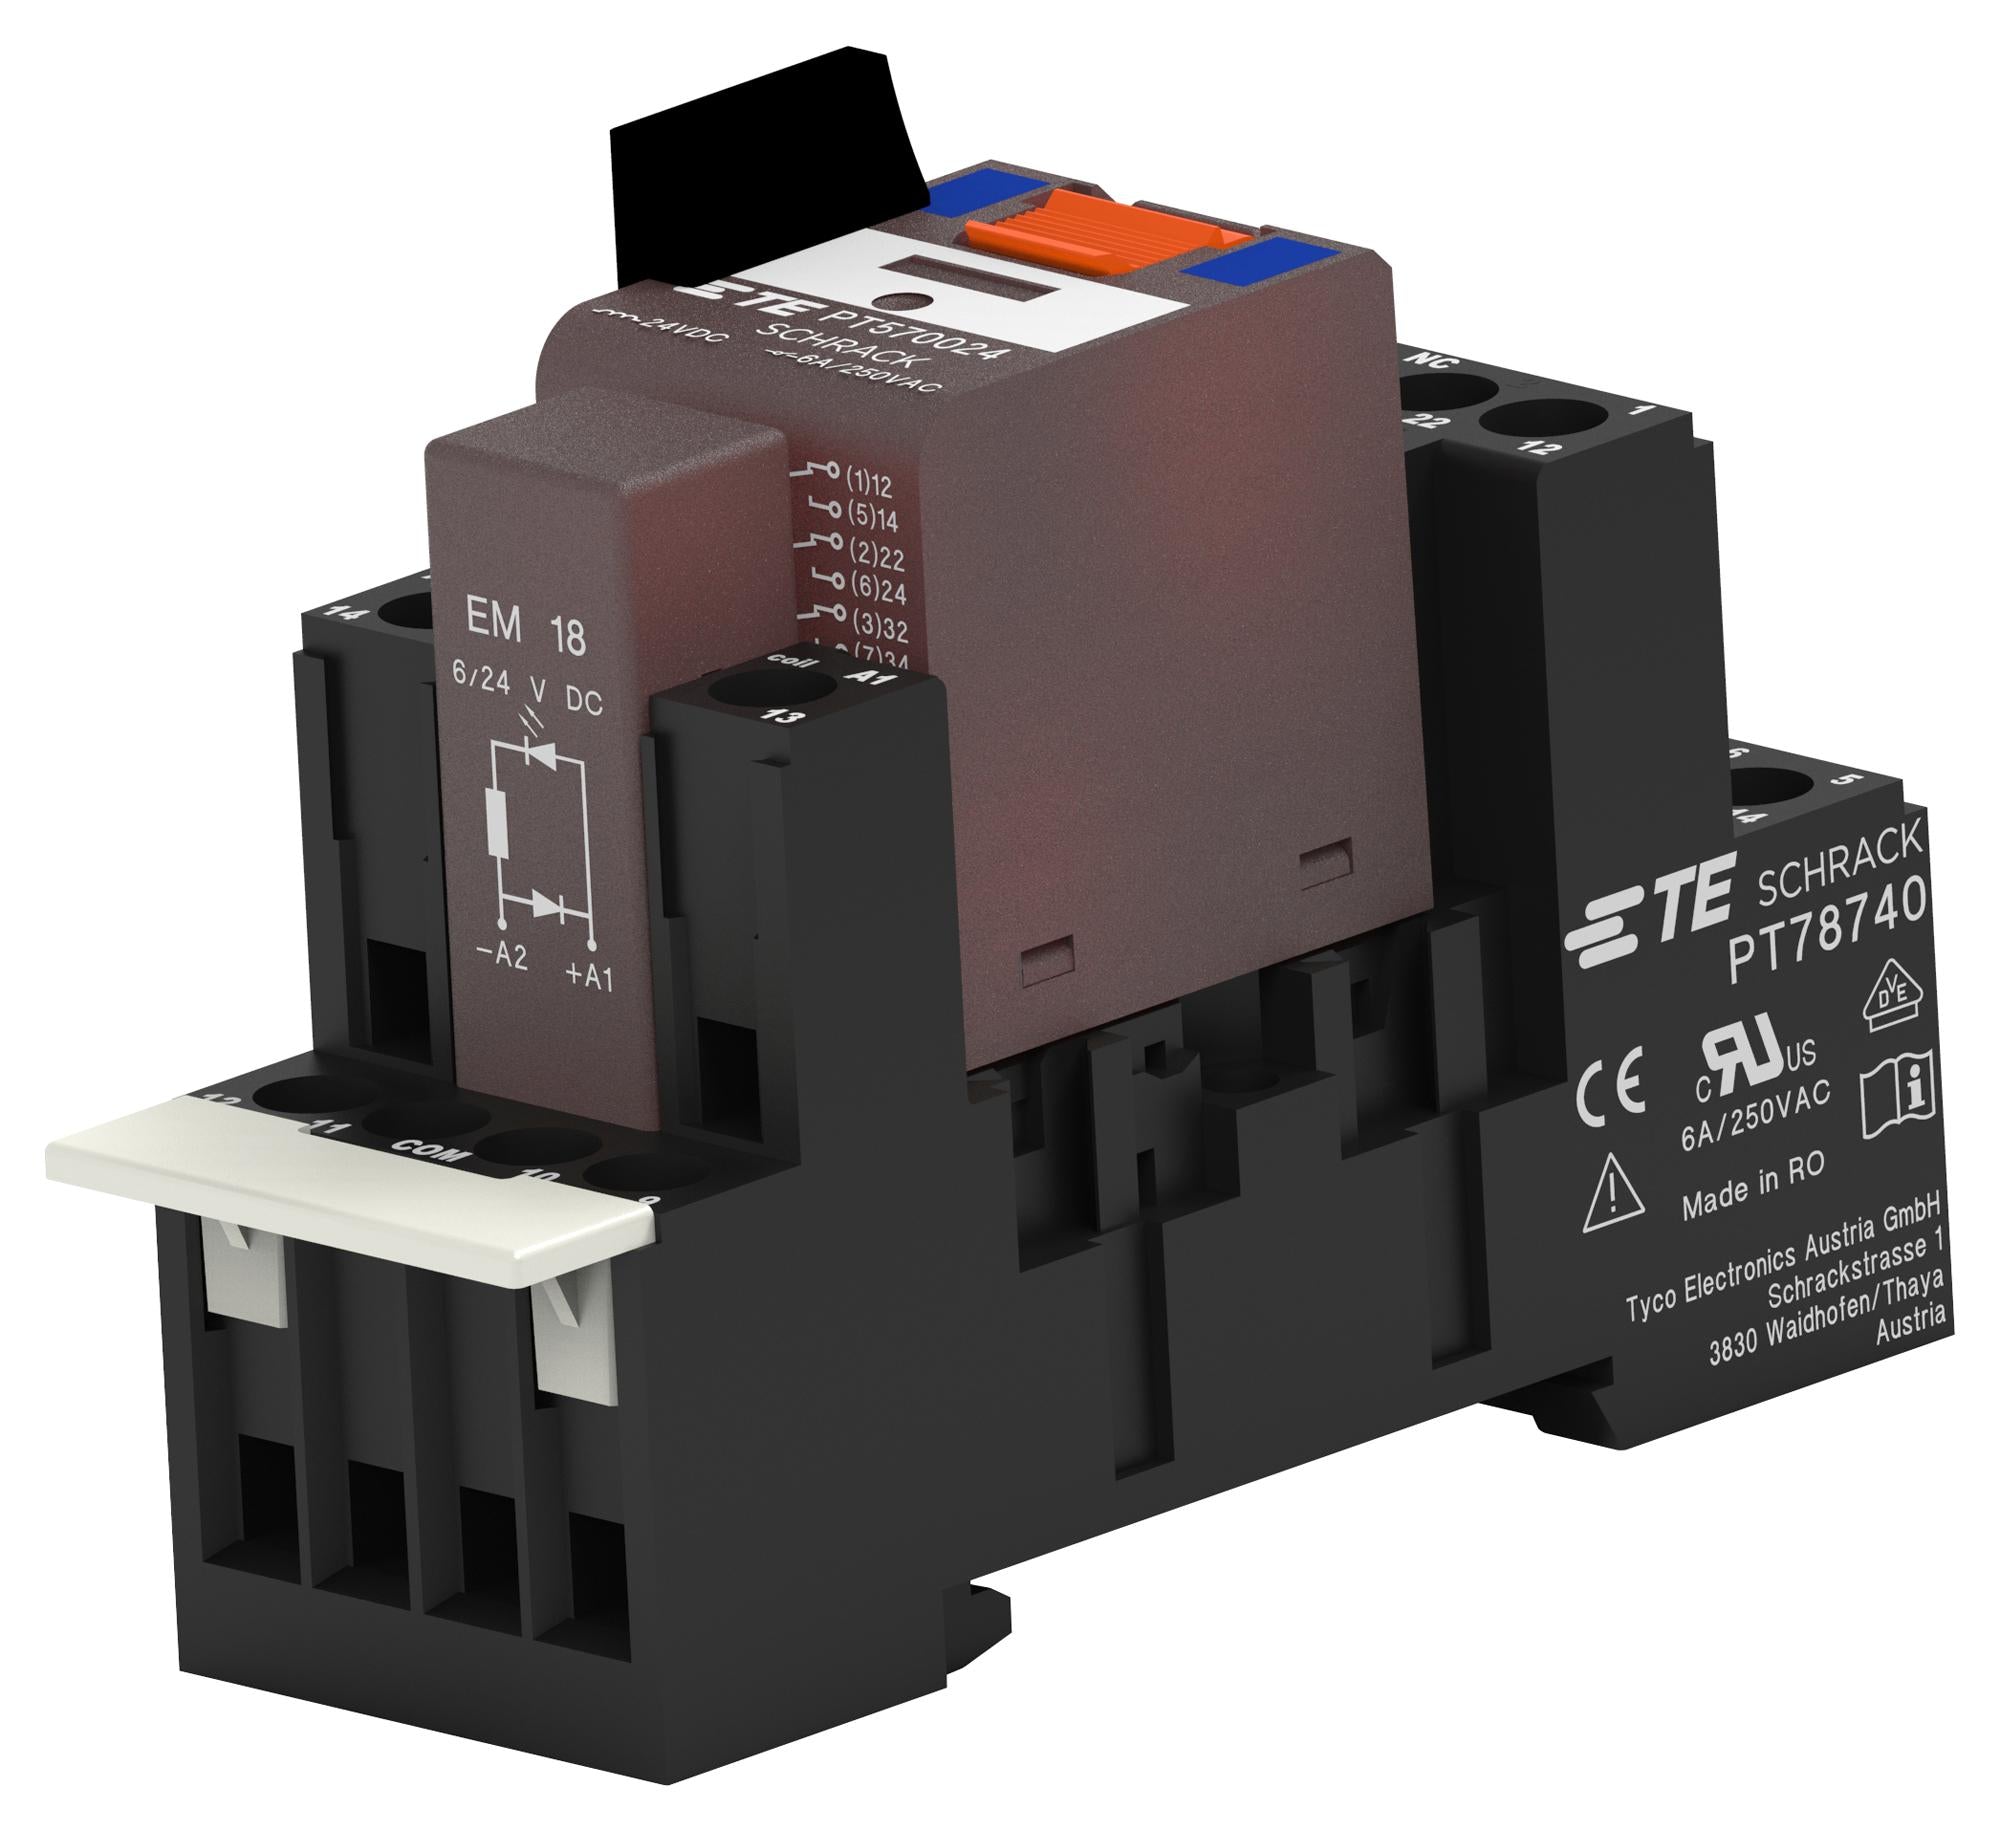 8-1415534-9 POWER RELAY, DPDT, 12A, 240V, PANEL SCHRACK - TE CONNECTIVITY